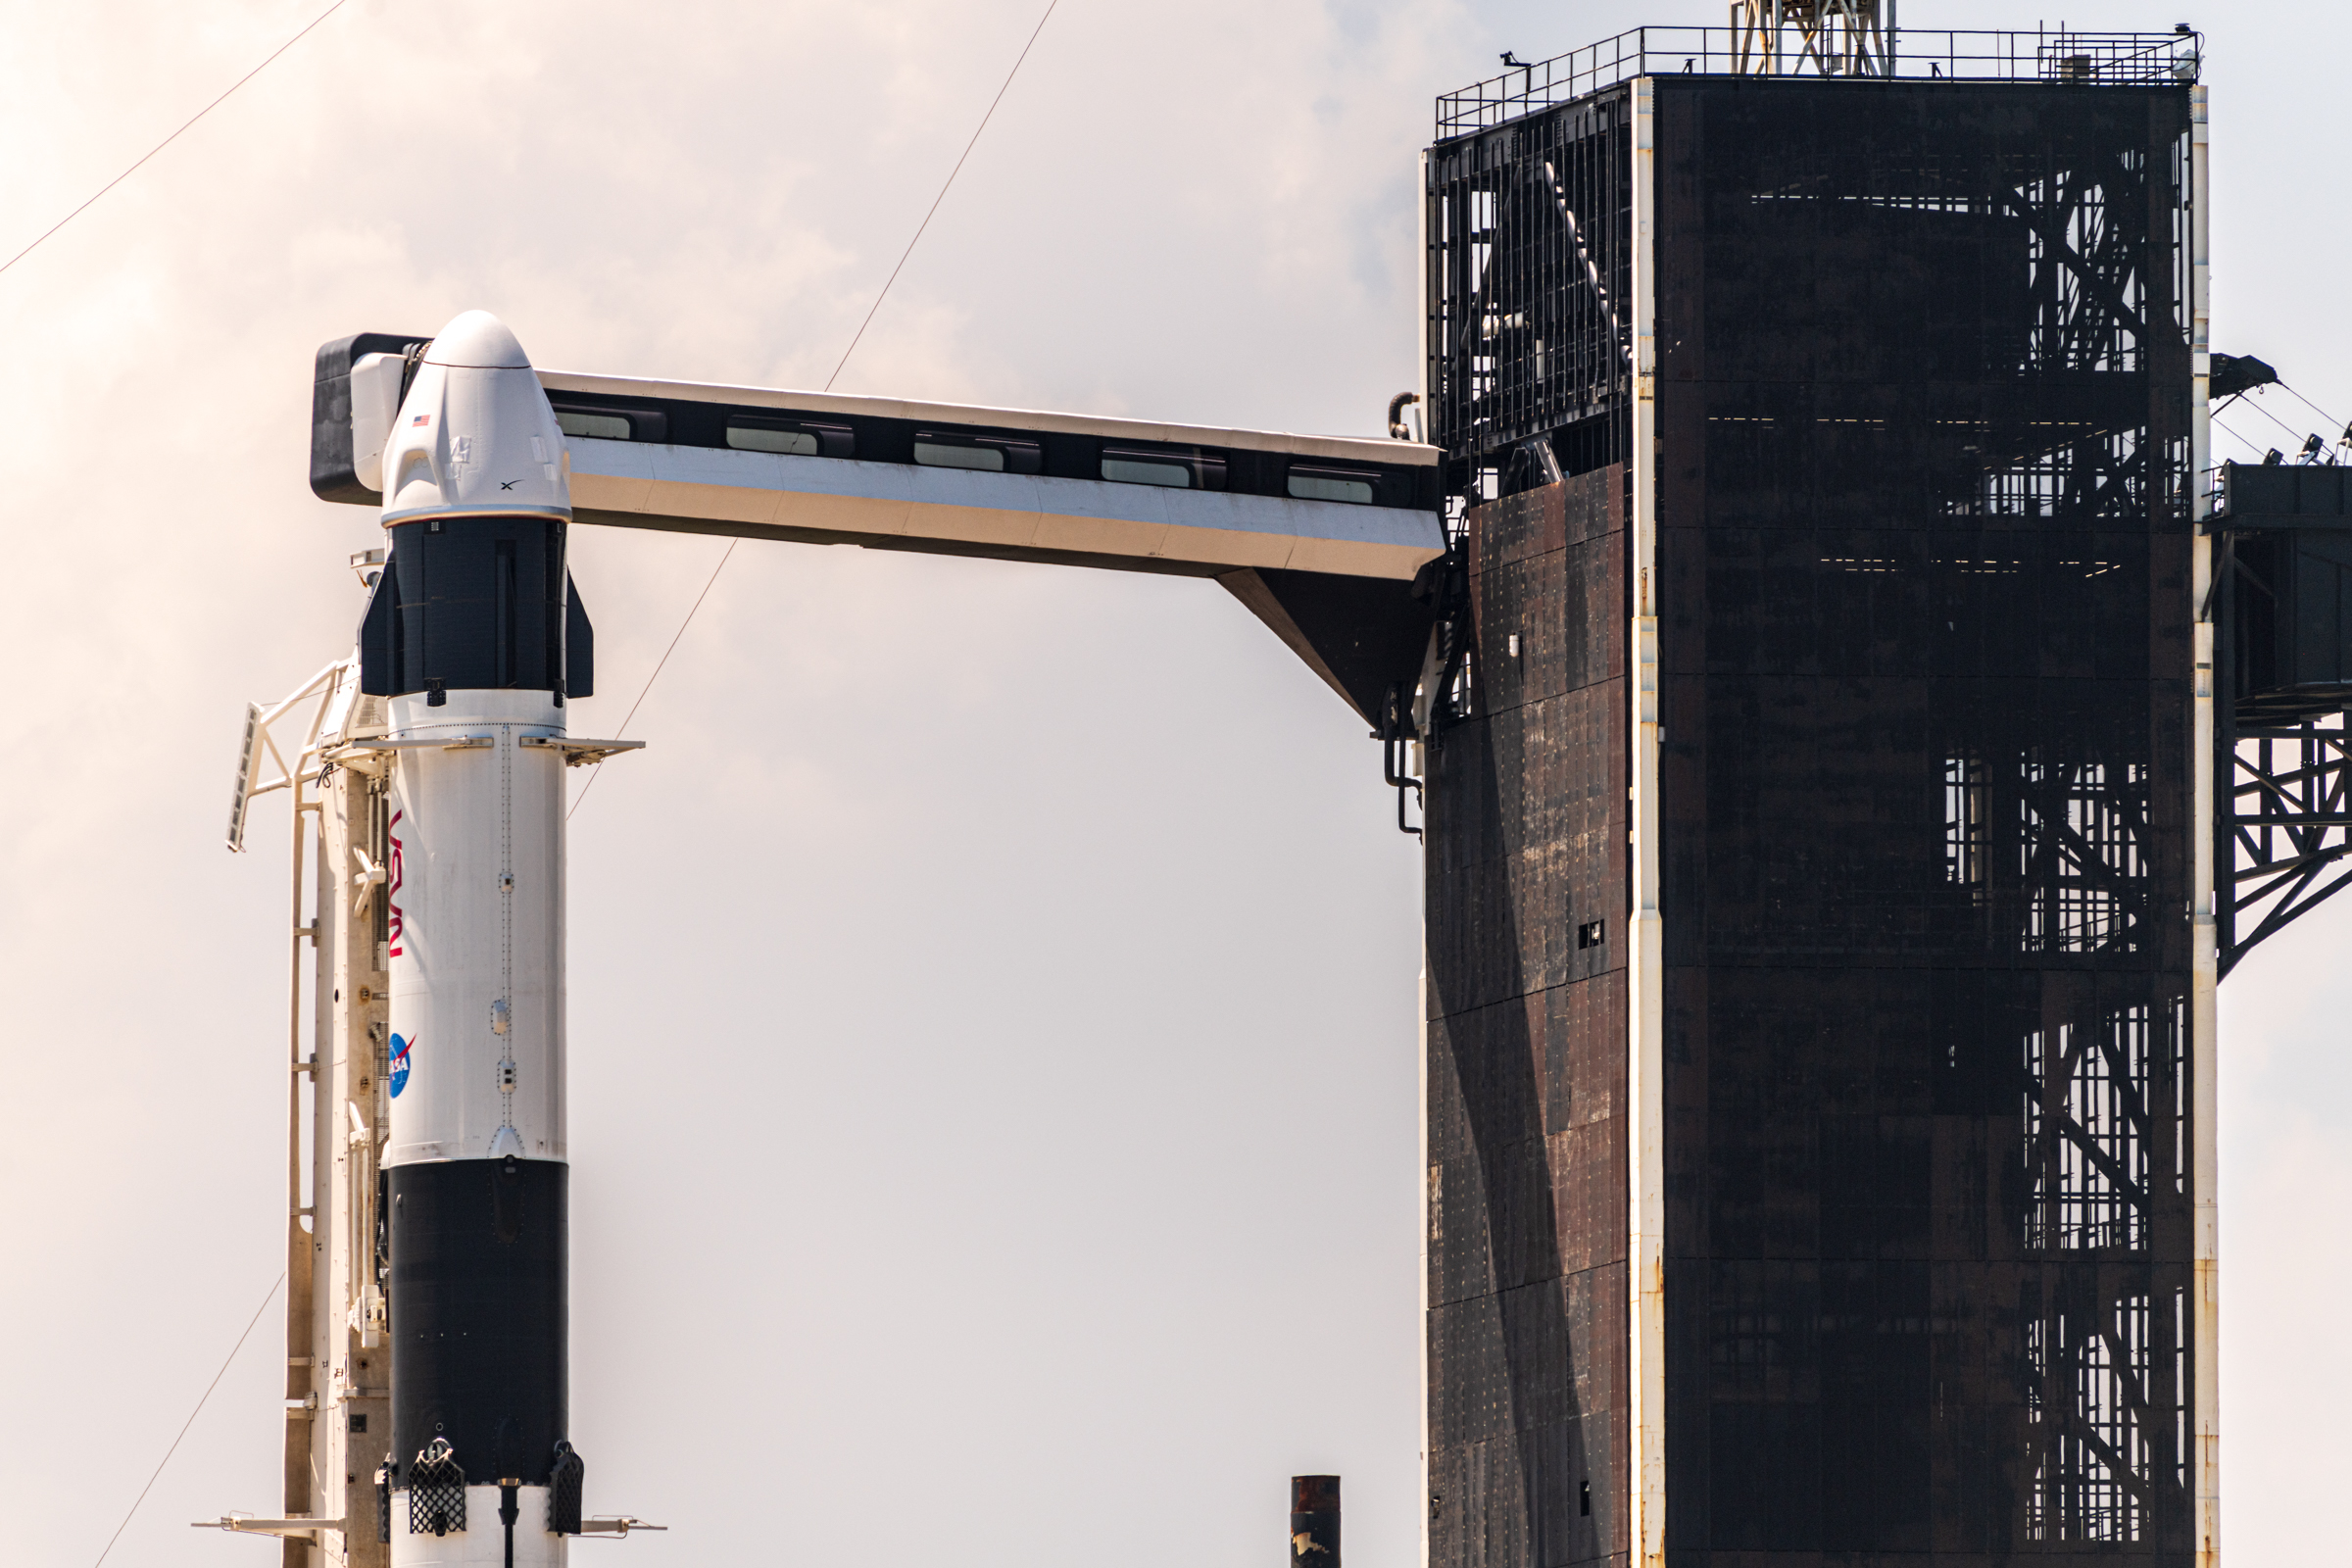 A closer view from cape Rd. The upper-stage and spacecraft, crew access arm and tower. The black paneling on the outside of the tall gantry structure is beginning to show signs of rust.